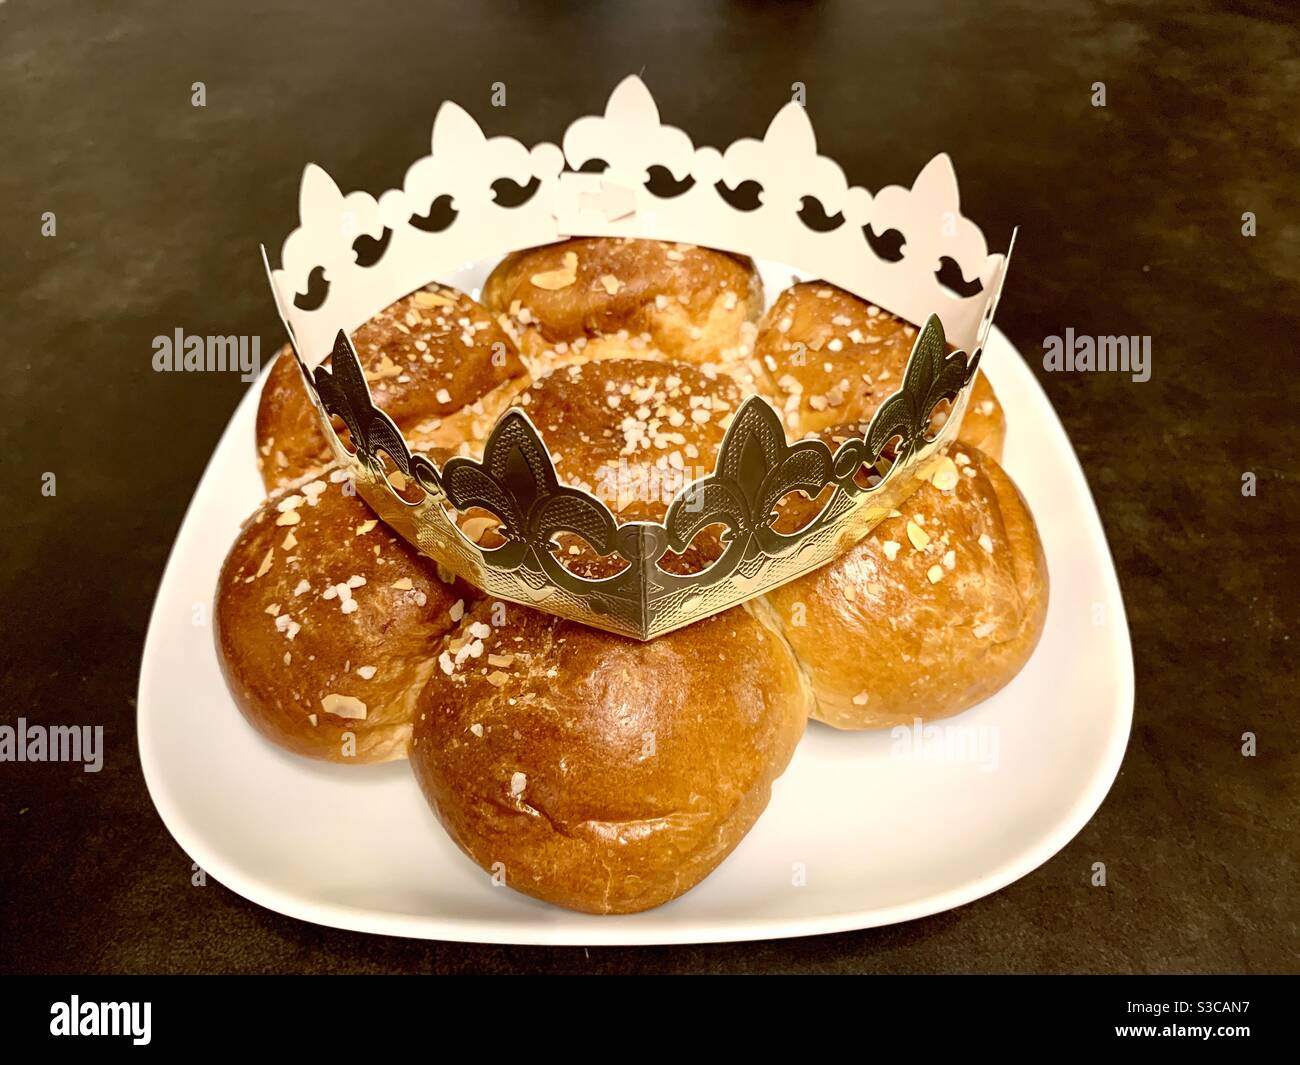 King‘s cake or Three Kings‘ cake is sweet pastry baked in German speaking countries on the occasion of the Epiphany. It is decorated with a paper crown. Stock Photo